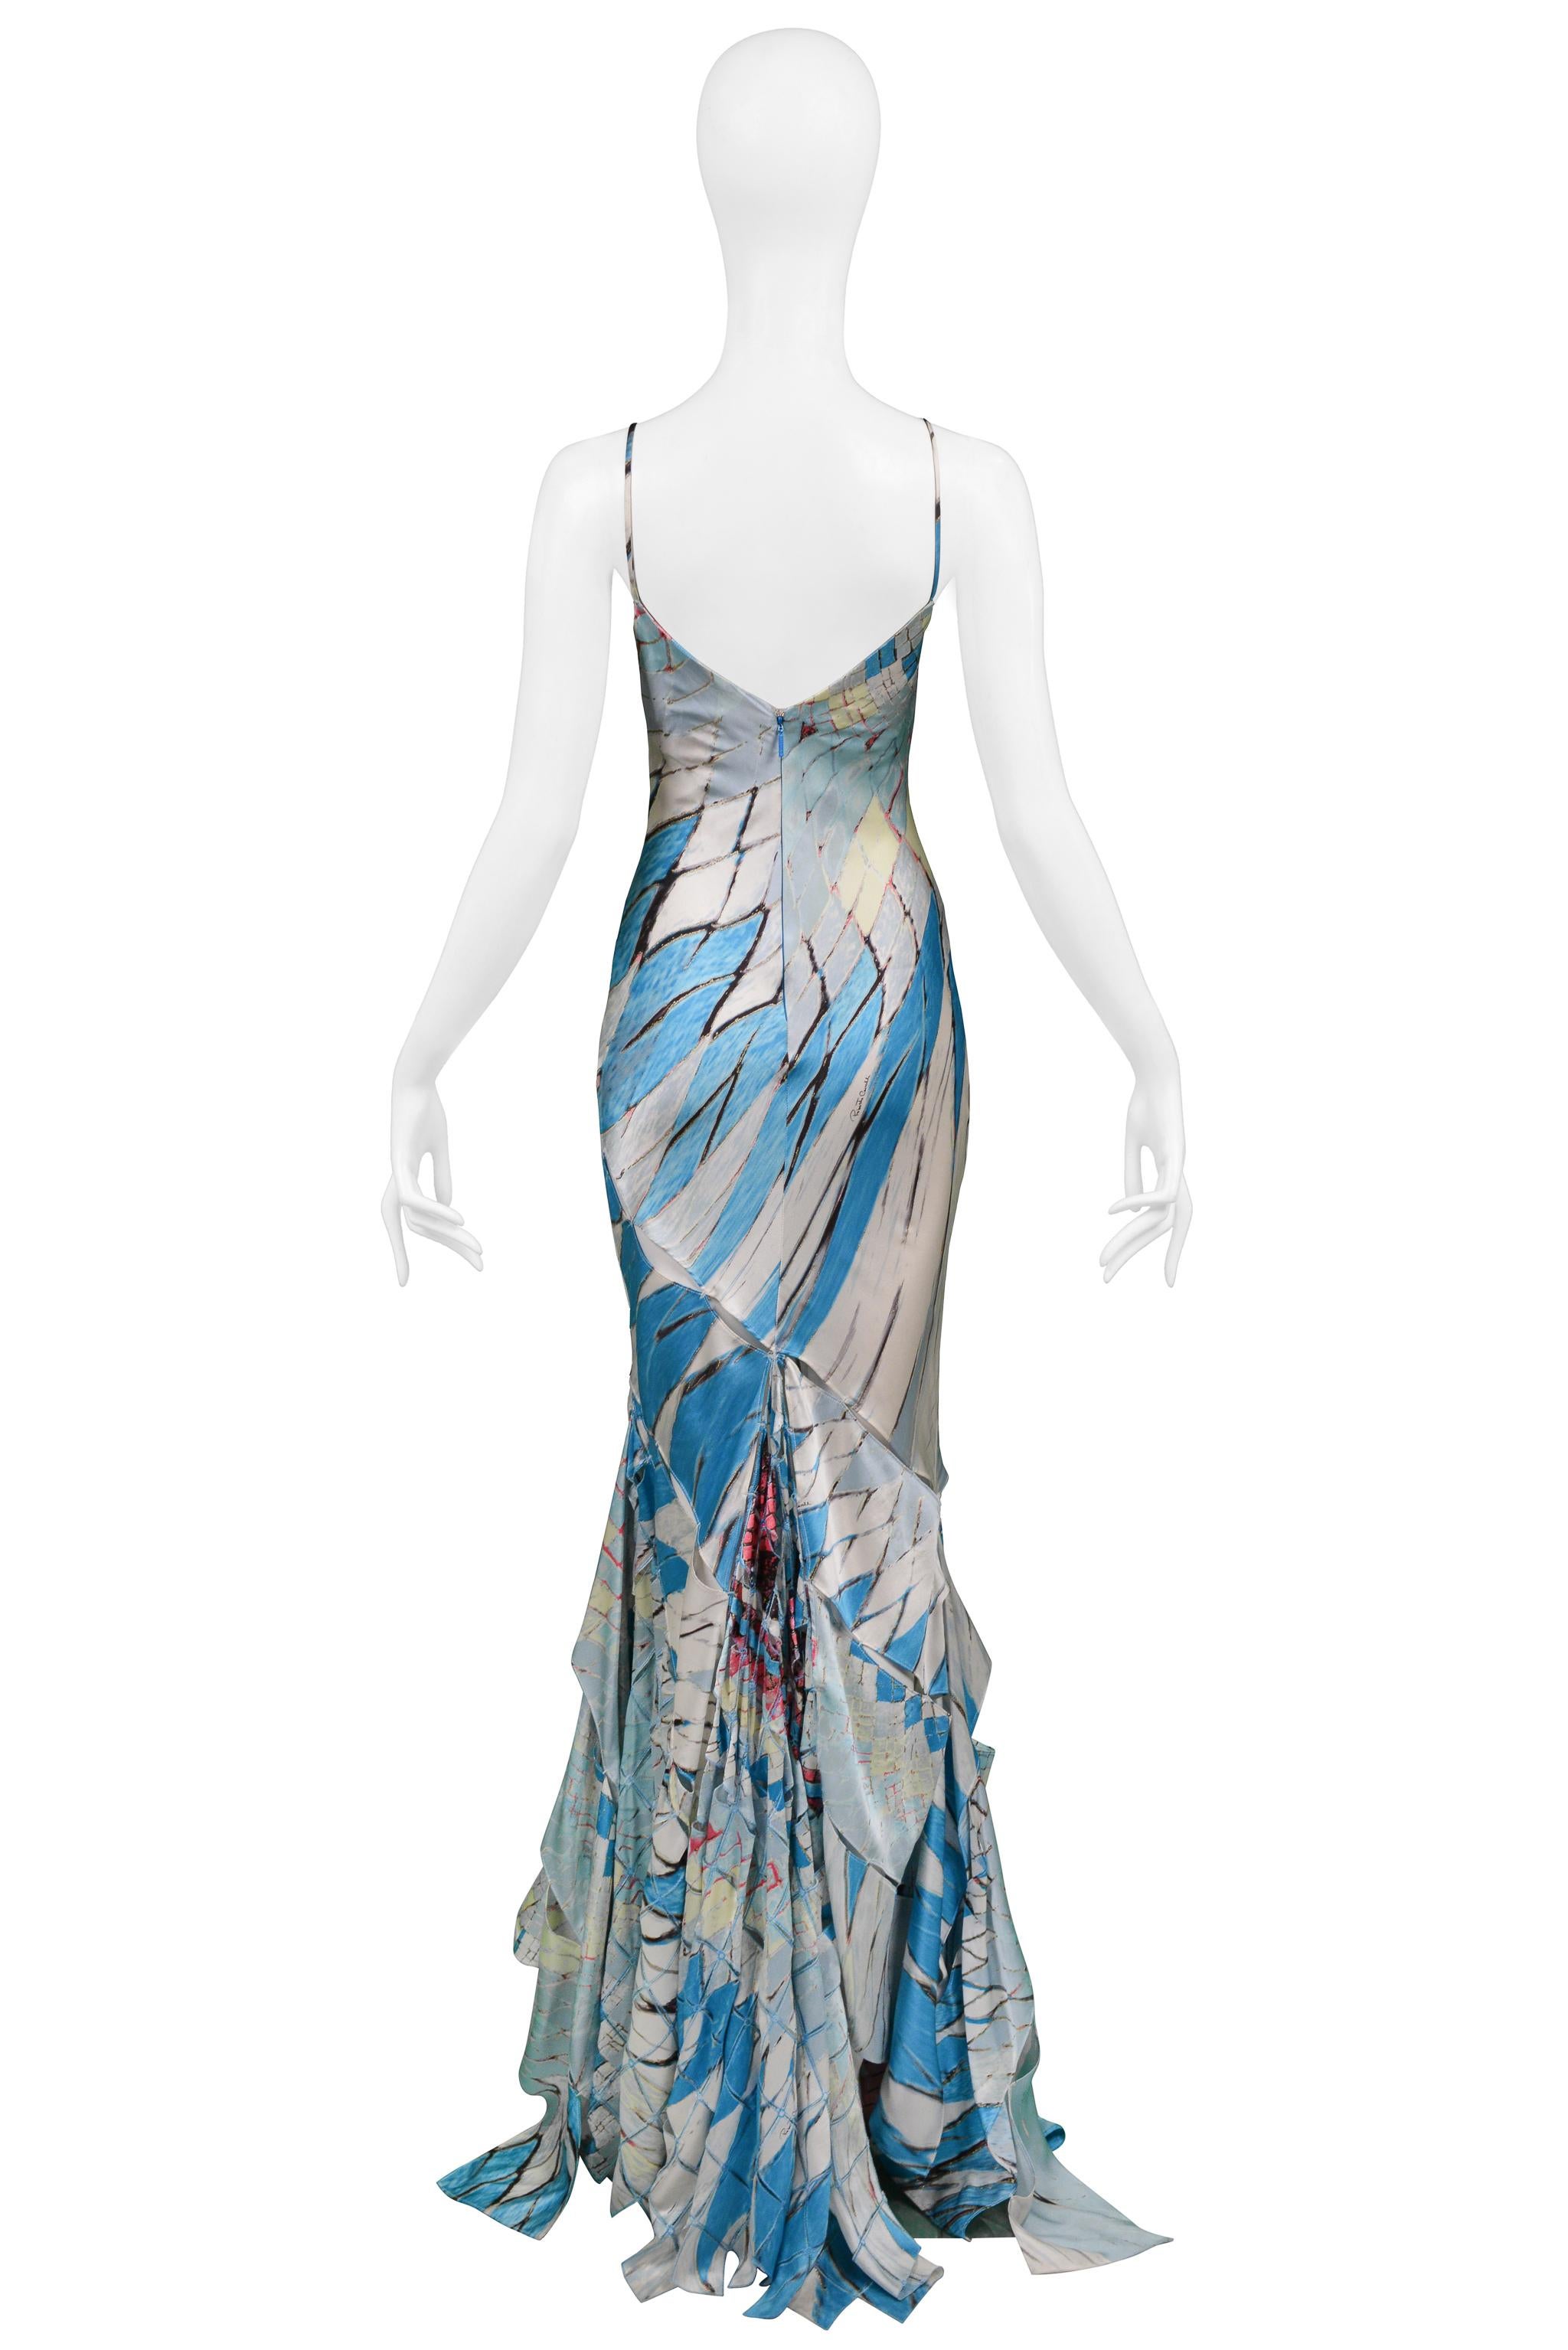 Roberto Cavalli Multicolor Stained Glass Print Gown With Cutout Slashes 2004 For Sale 3